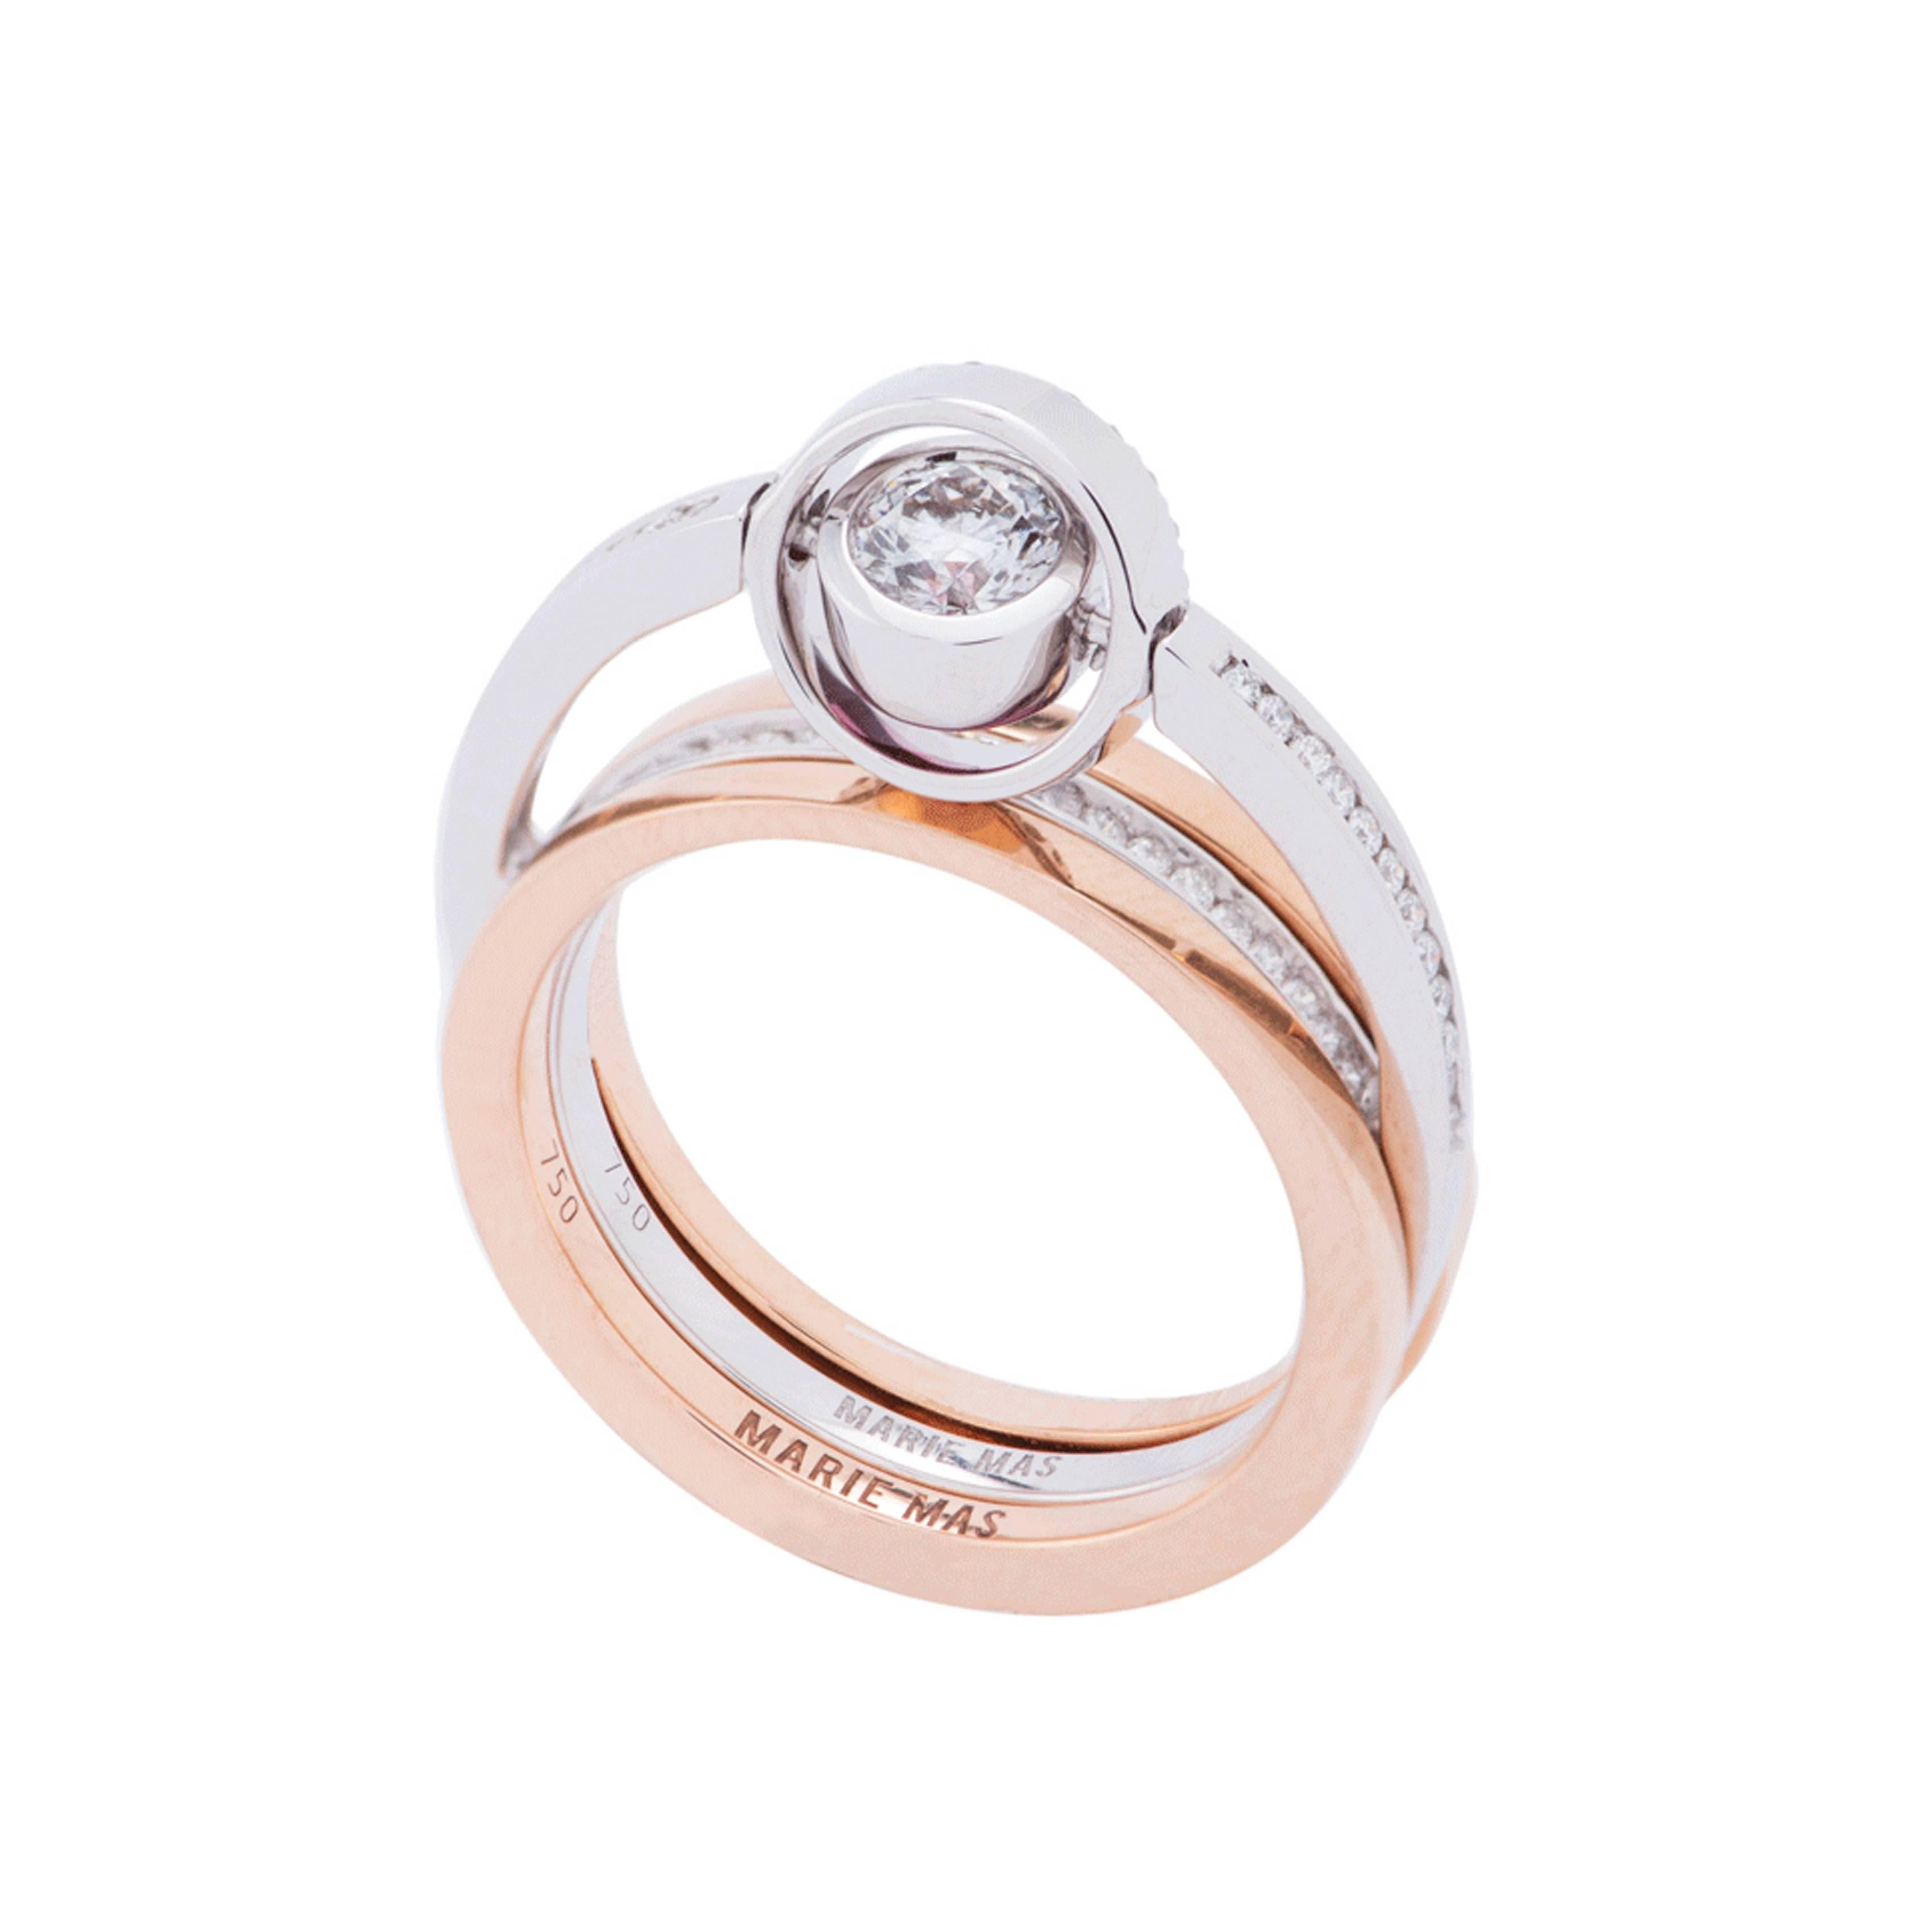 This Jewel from Marie Mas is made by two rings : the Swiveling Engagement Ring and the Swiveling Wedding Band. They can be worn together or separately. The Swiveling Engagement Ring is in 18 Karat White Gold, with Diamonds and a Pink Tourmaline. The